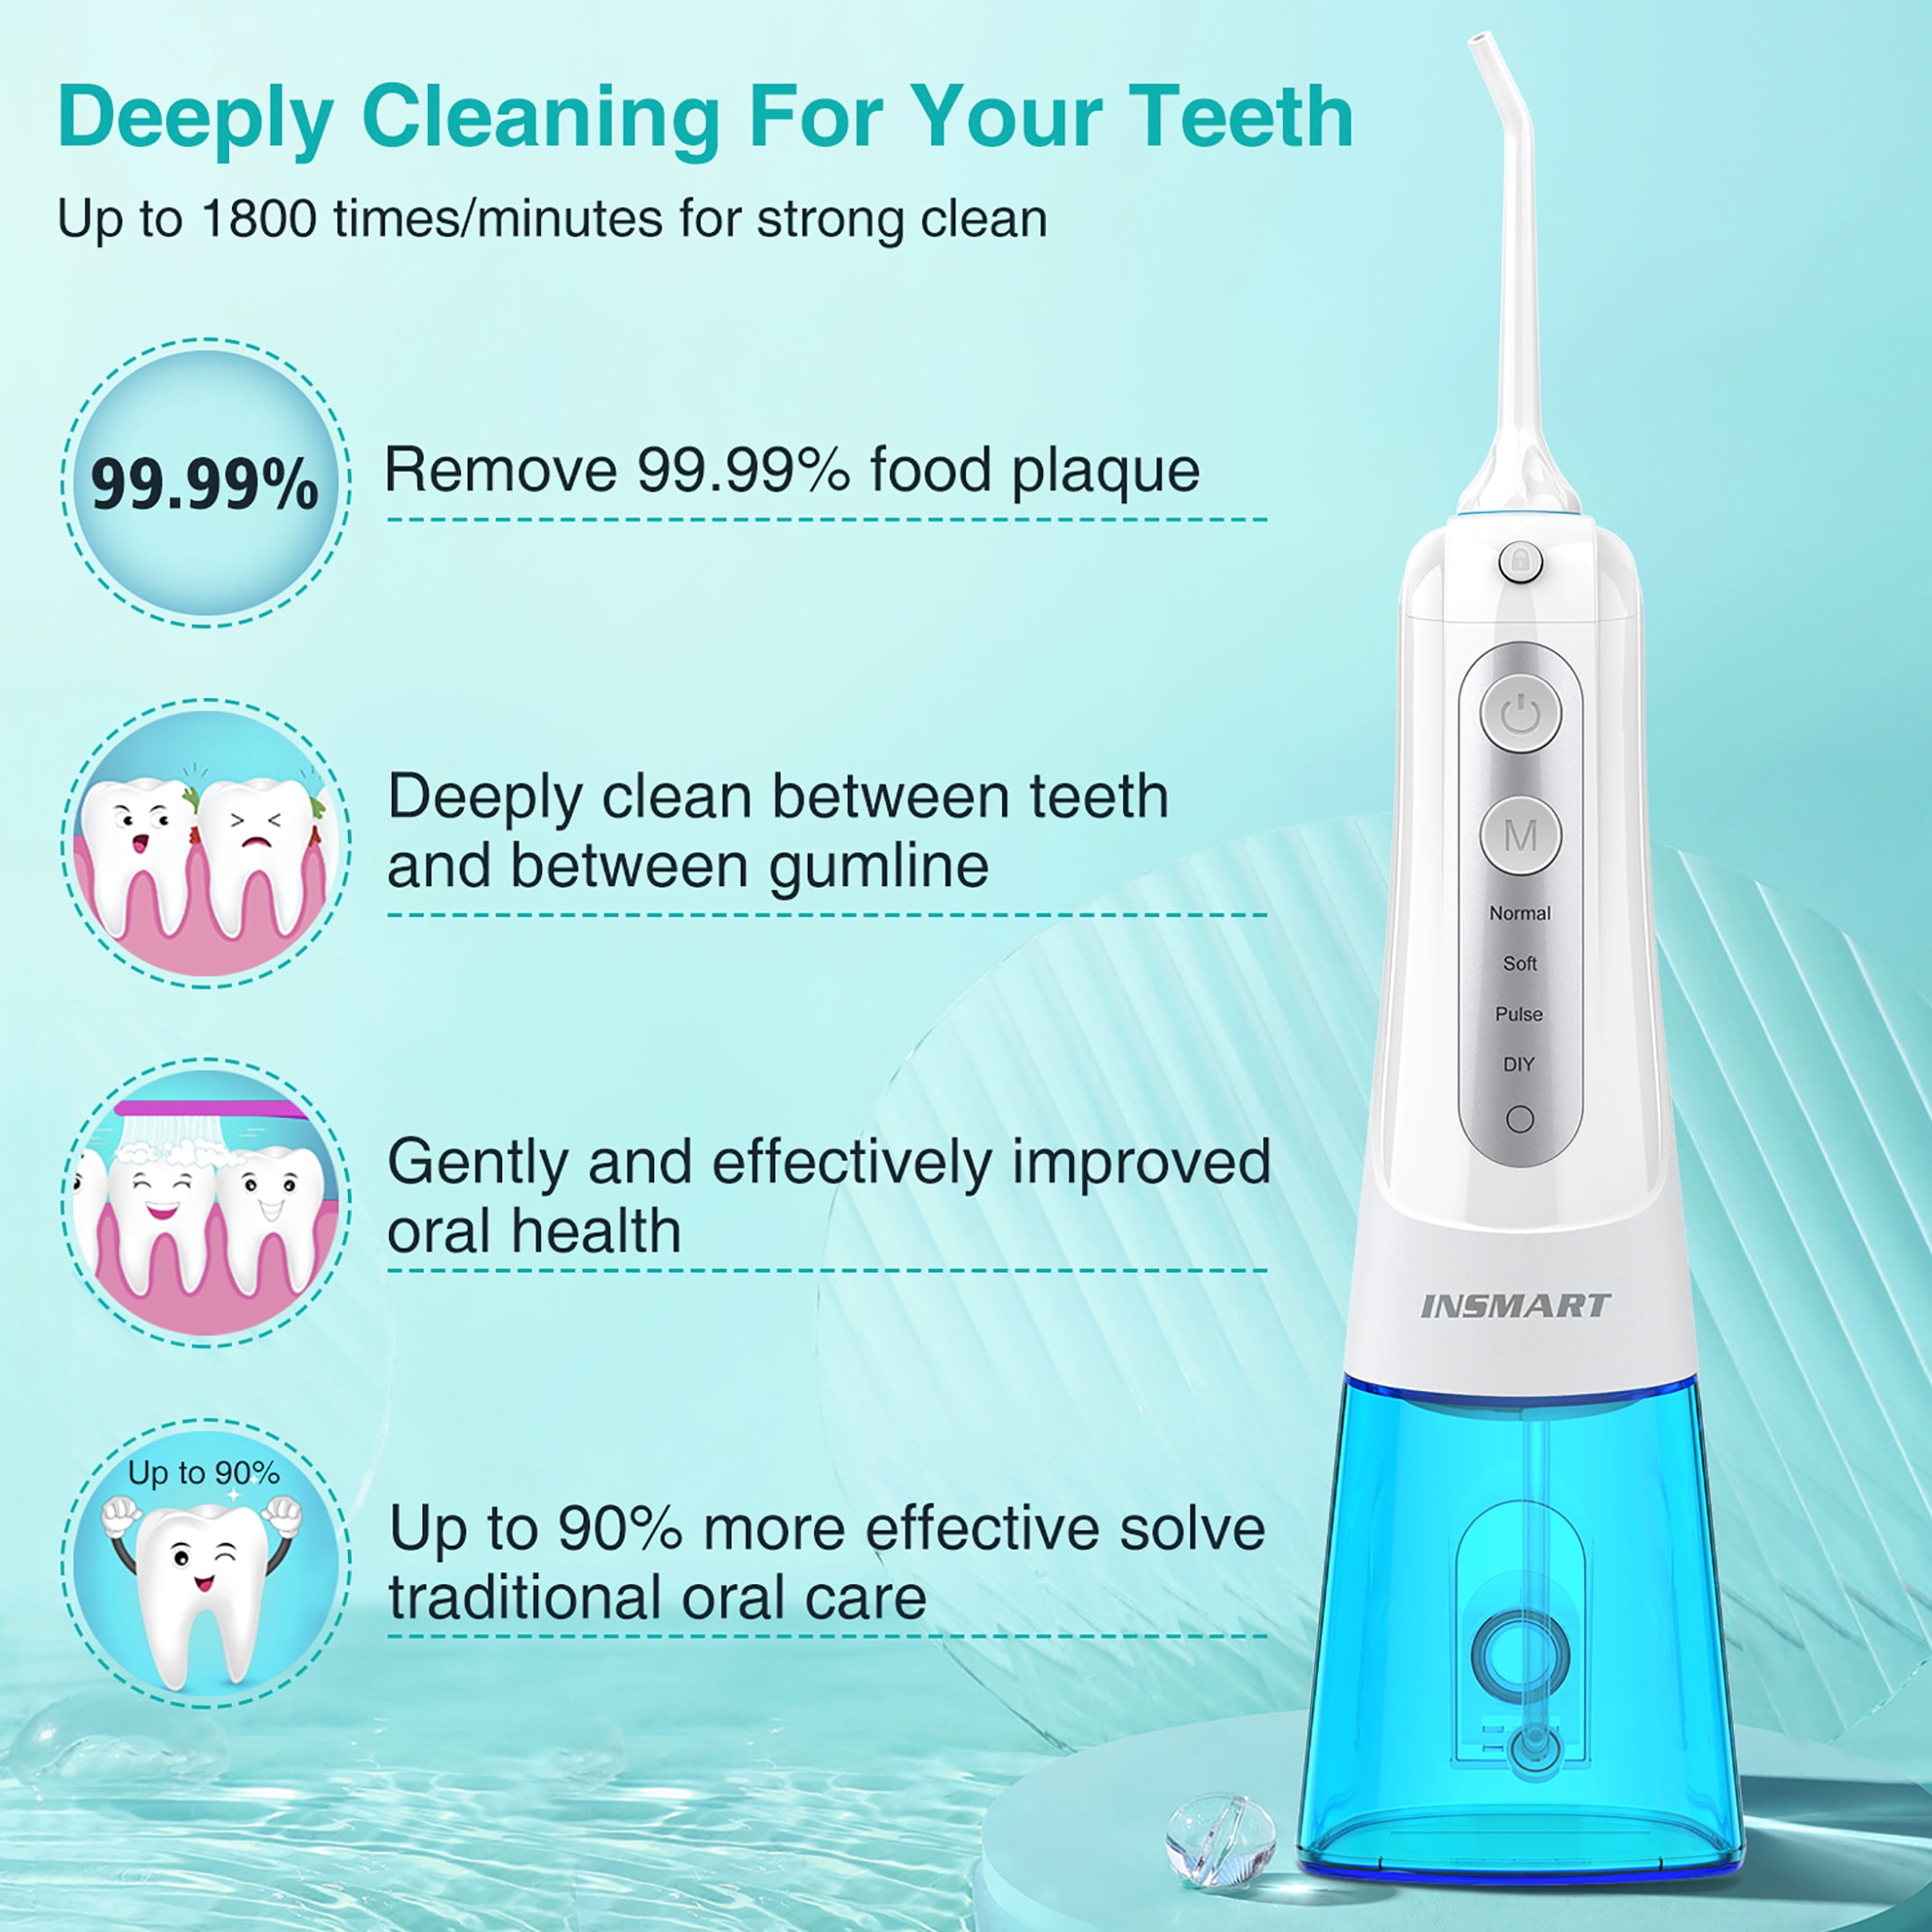 IPX7 Waterproof 4 Modes Irrigate for Oral Care Cordless Water Dental Flosser Teeth Cleaner INSMART Professional 300ML Tank DIY Mode USB Rechargeable Dental Oral Irrigator for Home and Travel 